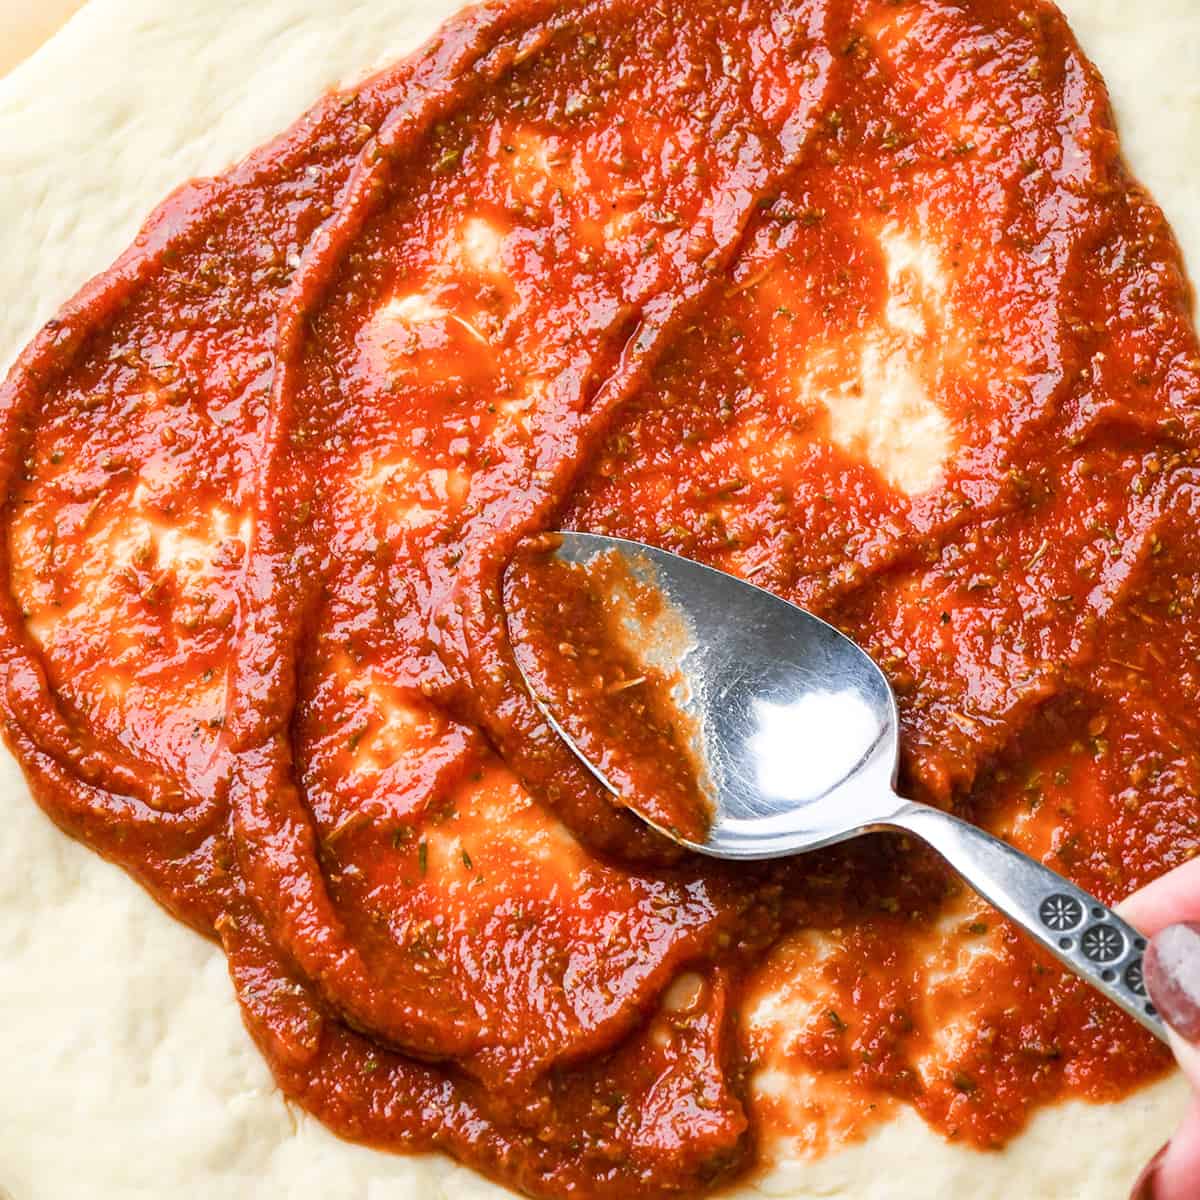 Sauce being spread onto this pizza dough recipe